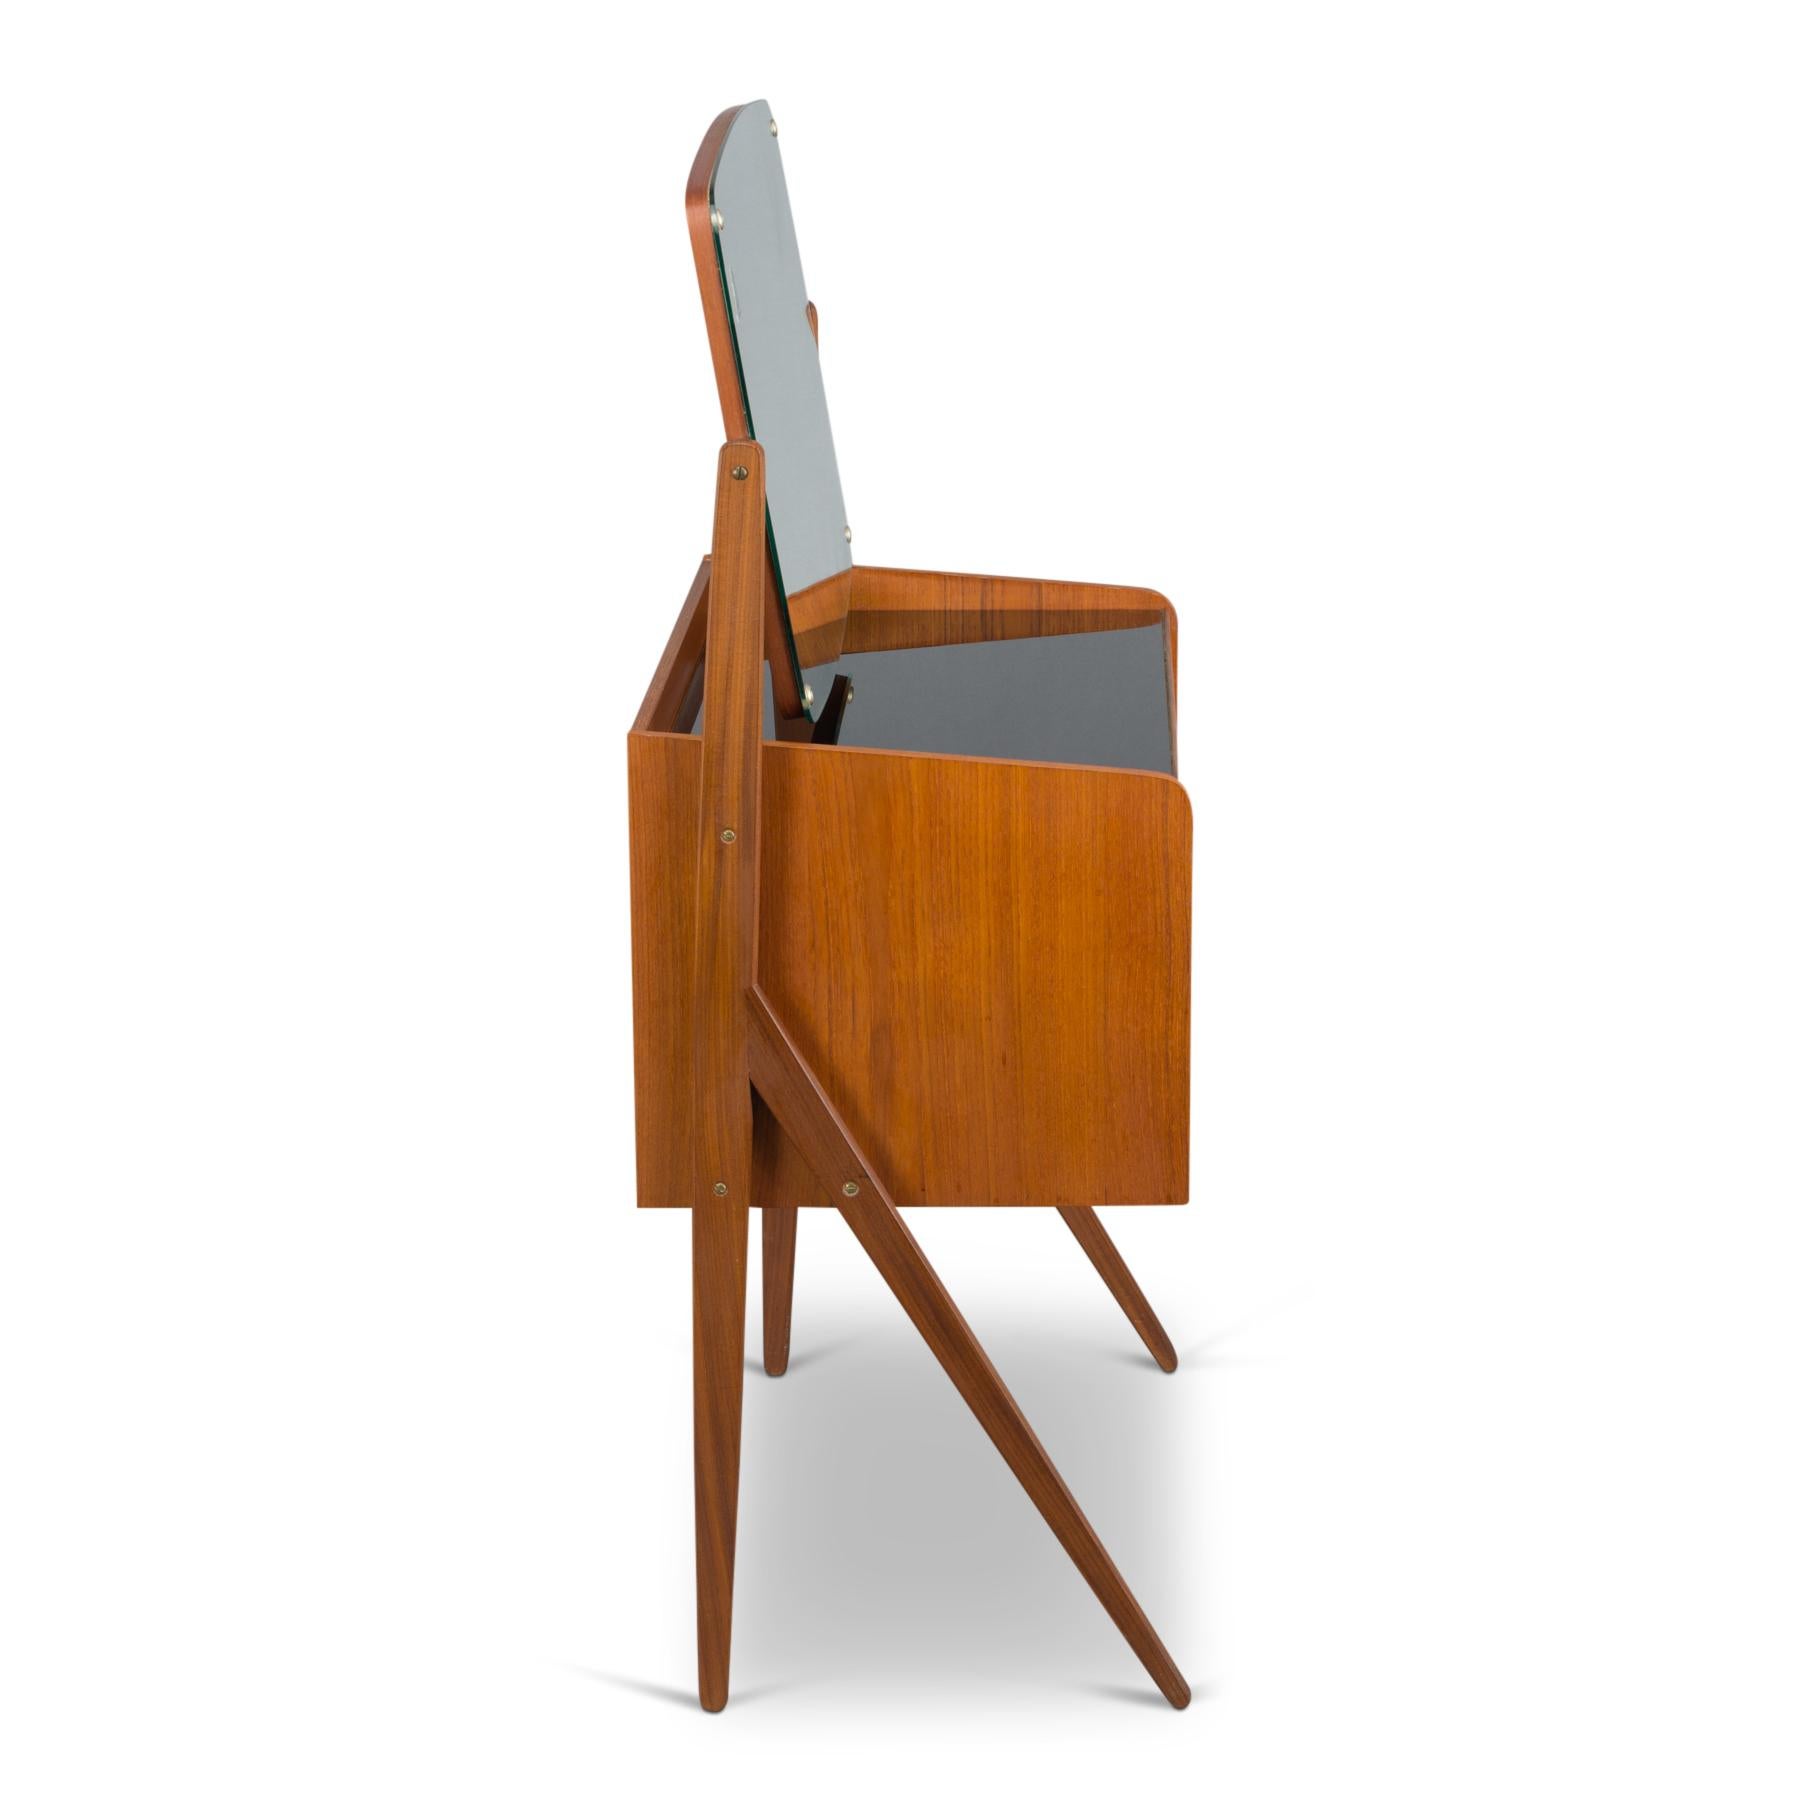 Danish Mid-Century Modern design vanity that will love you. This Danish beauty is made in teak veneer. The mirror of this vanity is oval shaped and suspended from the elegant legs of the vanity. The drawers are of different sizes and ideal to hold